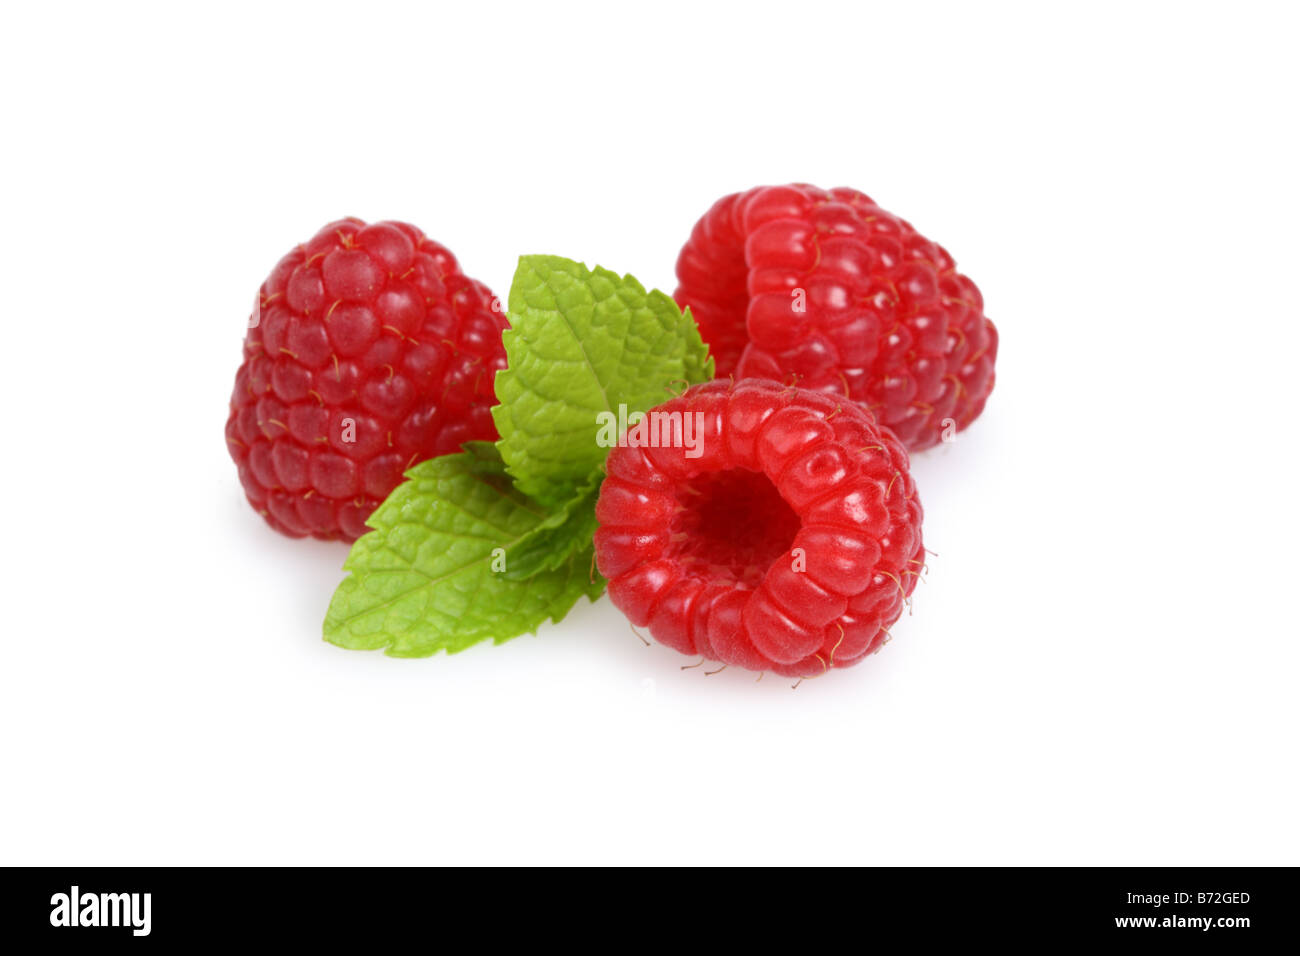 Red raspberries with leaves cut out on white background Stock Photo